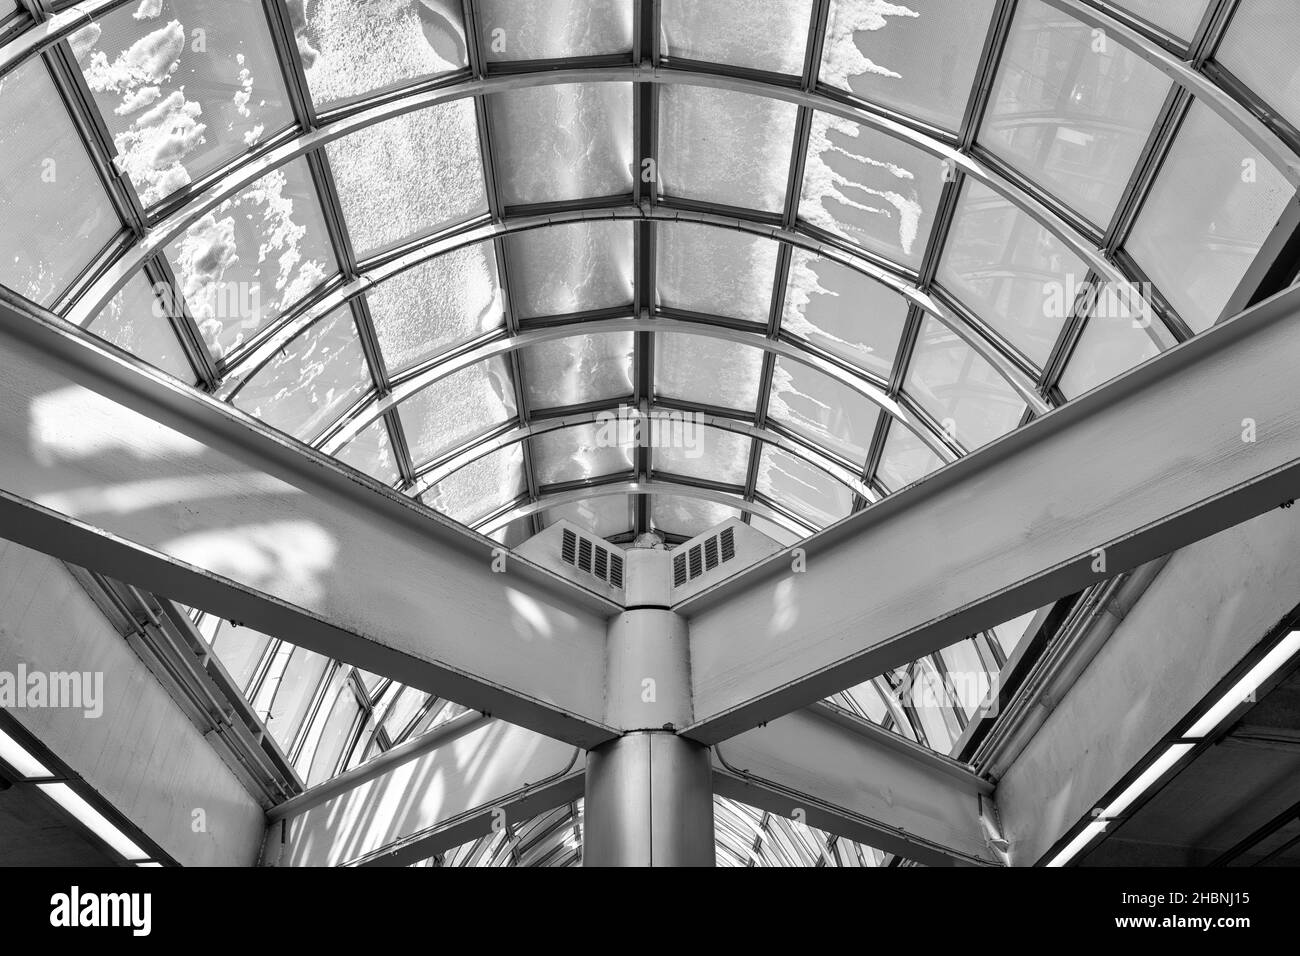 Abstract black and white architecture Stock Photo